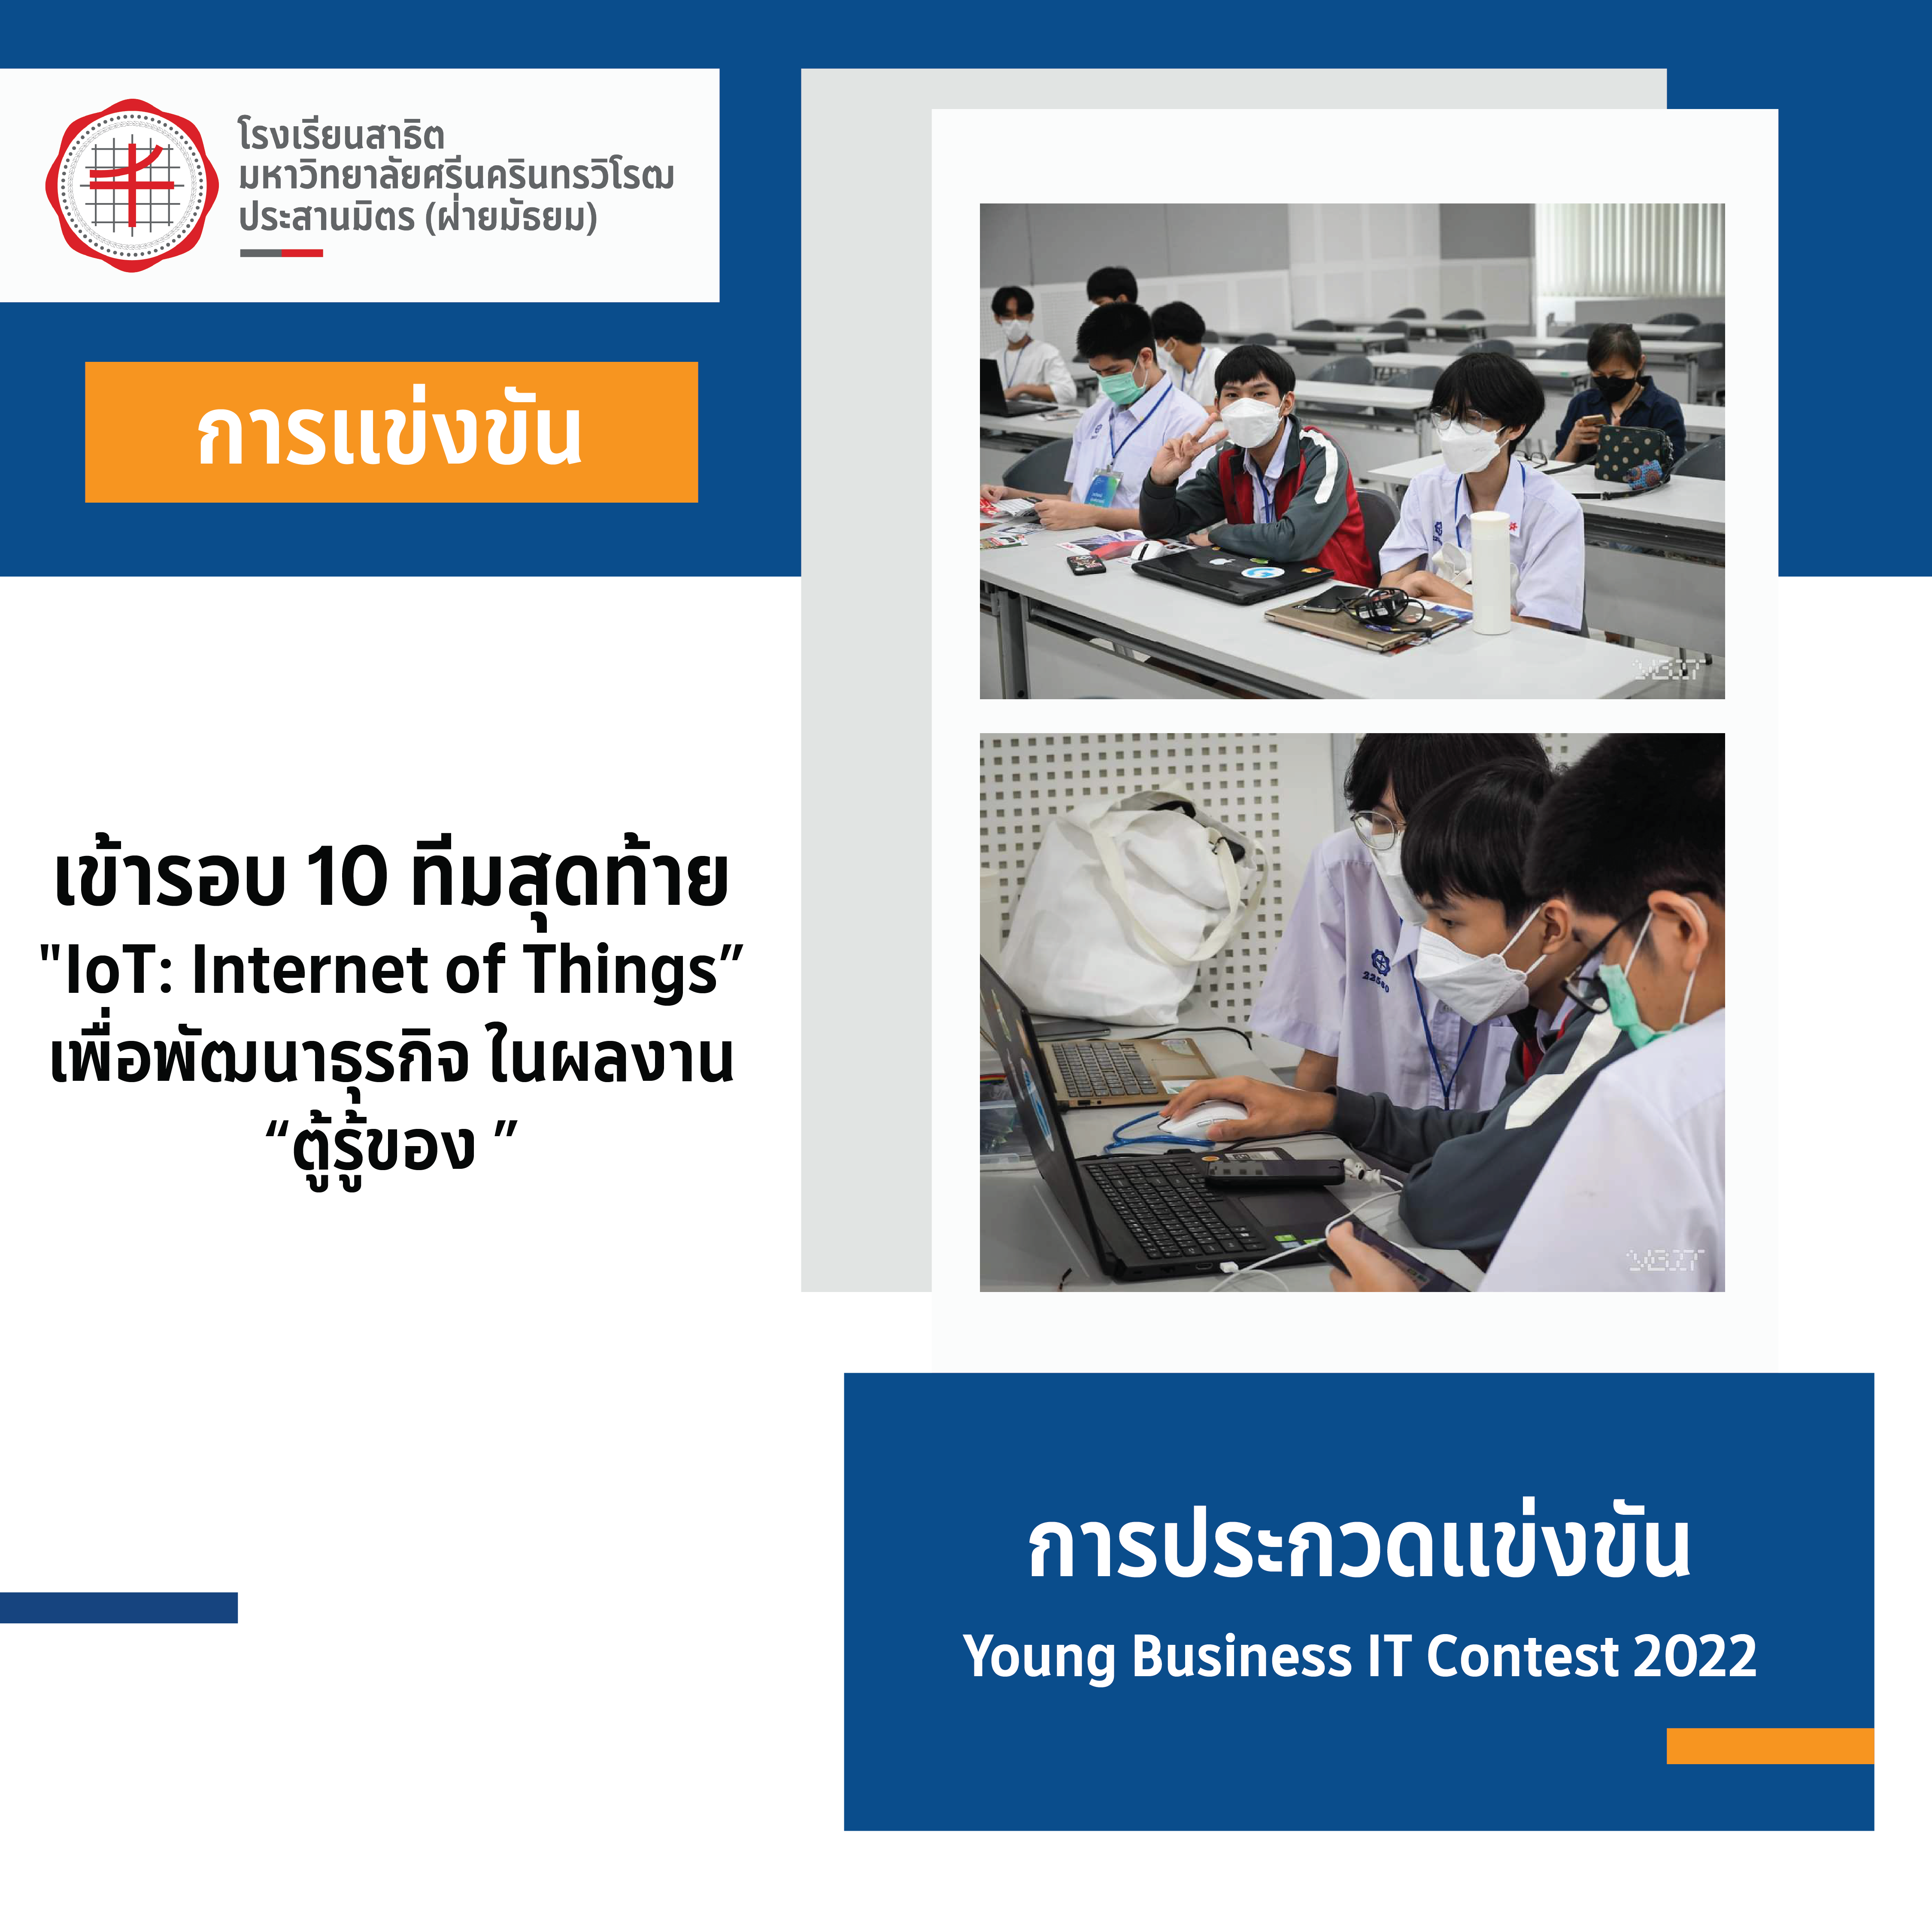 Young Business IT Contest 2022